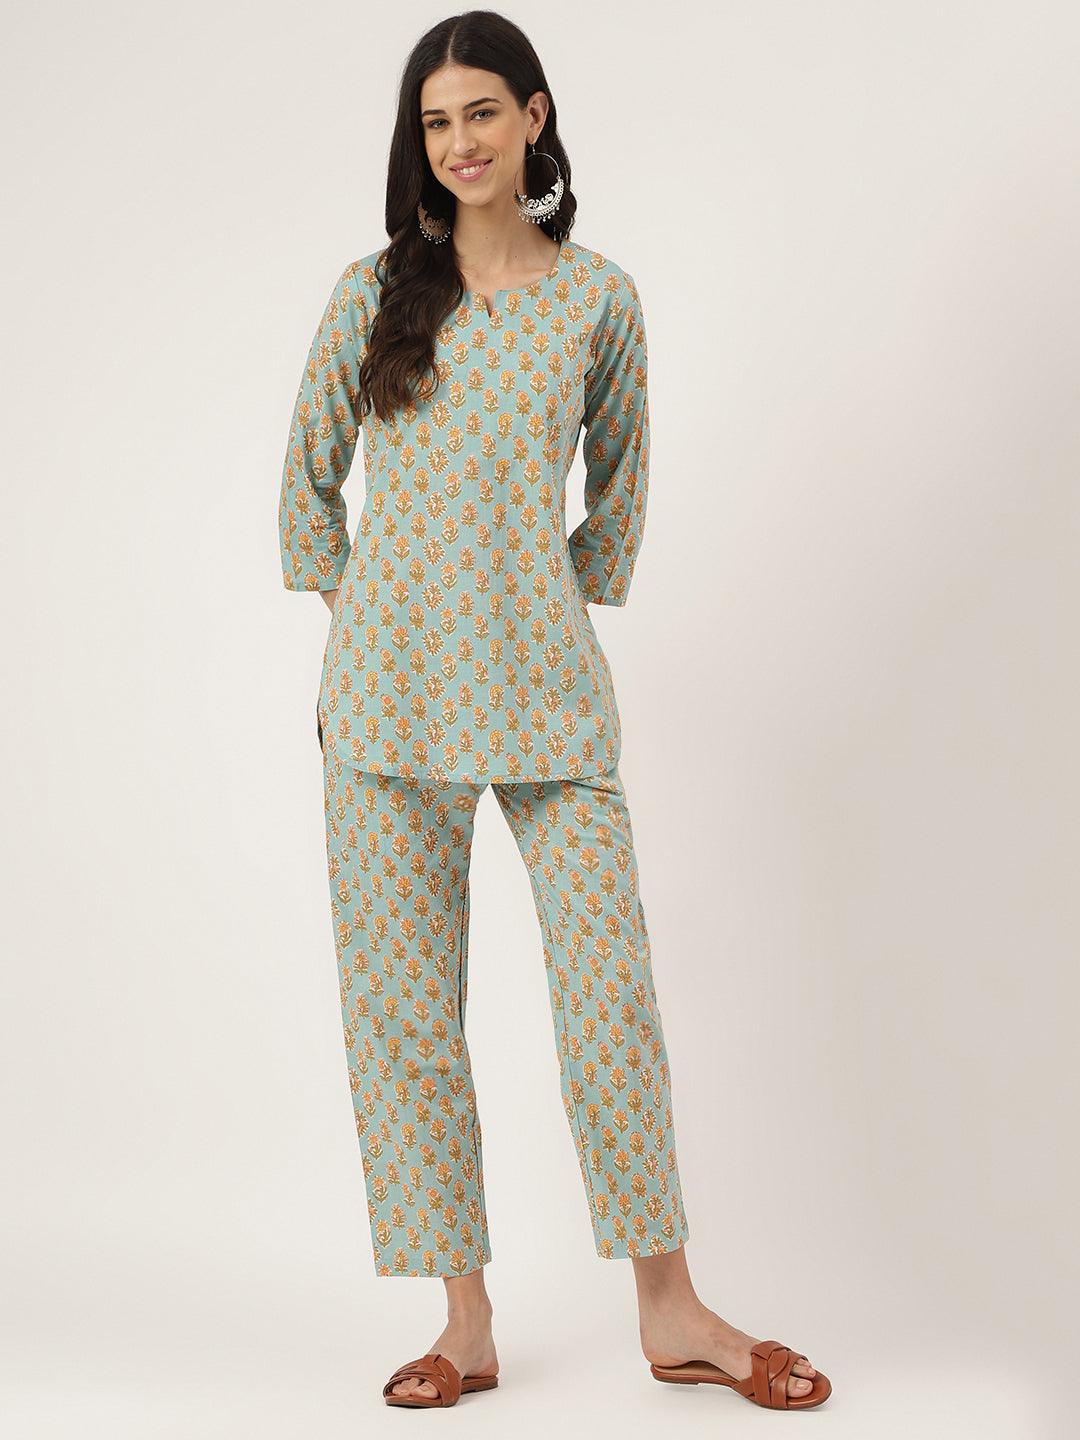 Buy Night Suit for Women and Night Dress Online in India | Zivame